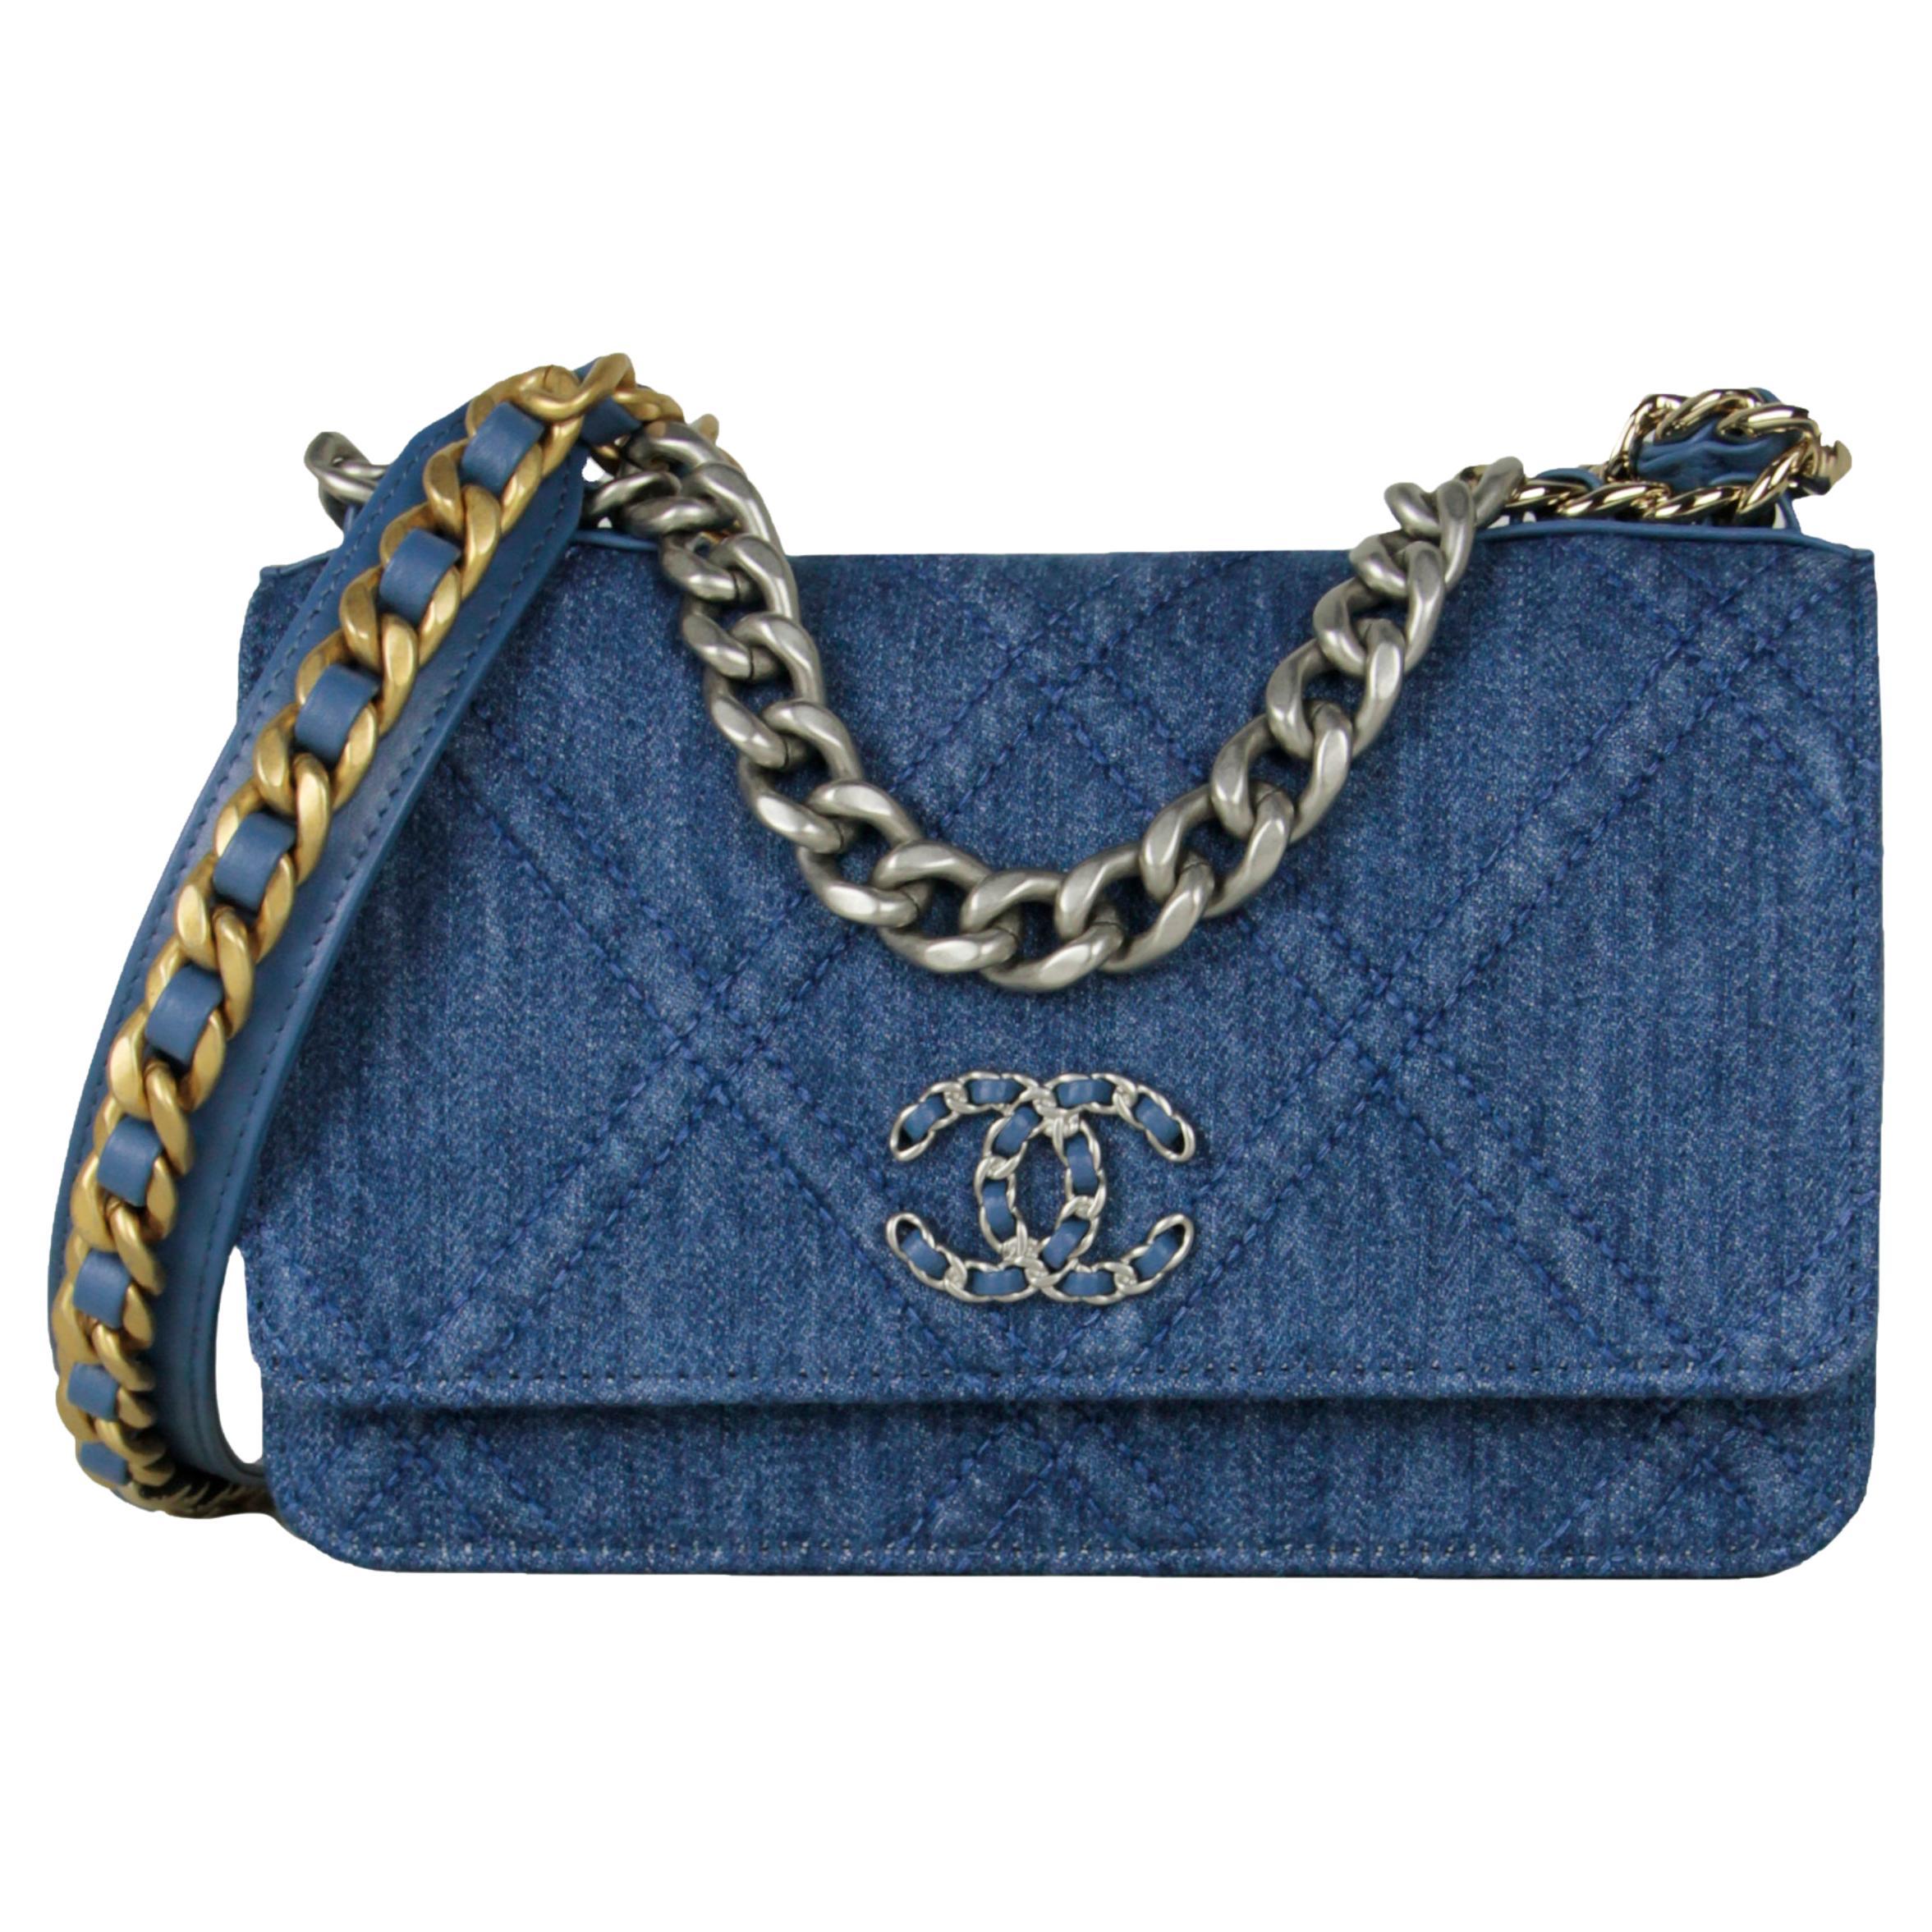 Chanel 2022 Denim Quilted 19 Wallet On Chain Woc Crossbody Bag For Sale At  1Stdibs | Chanel Denim Bag, Denim Chanel Bag, Chanel Denim Bag 2022